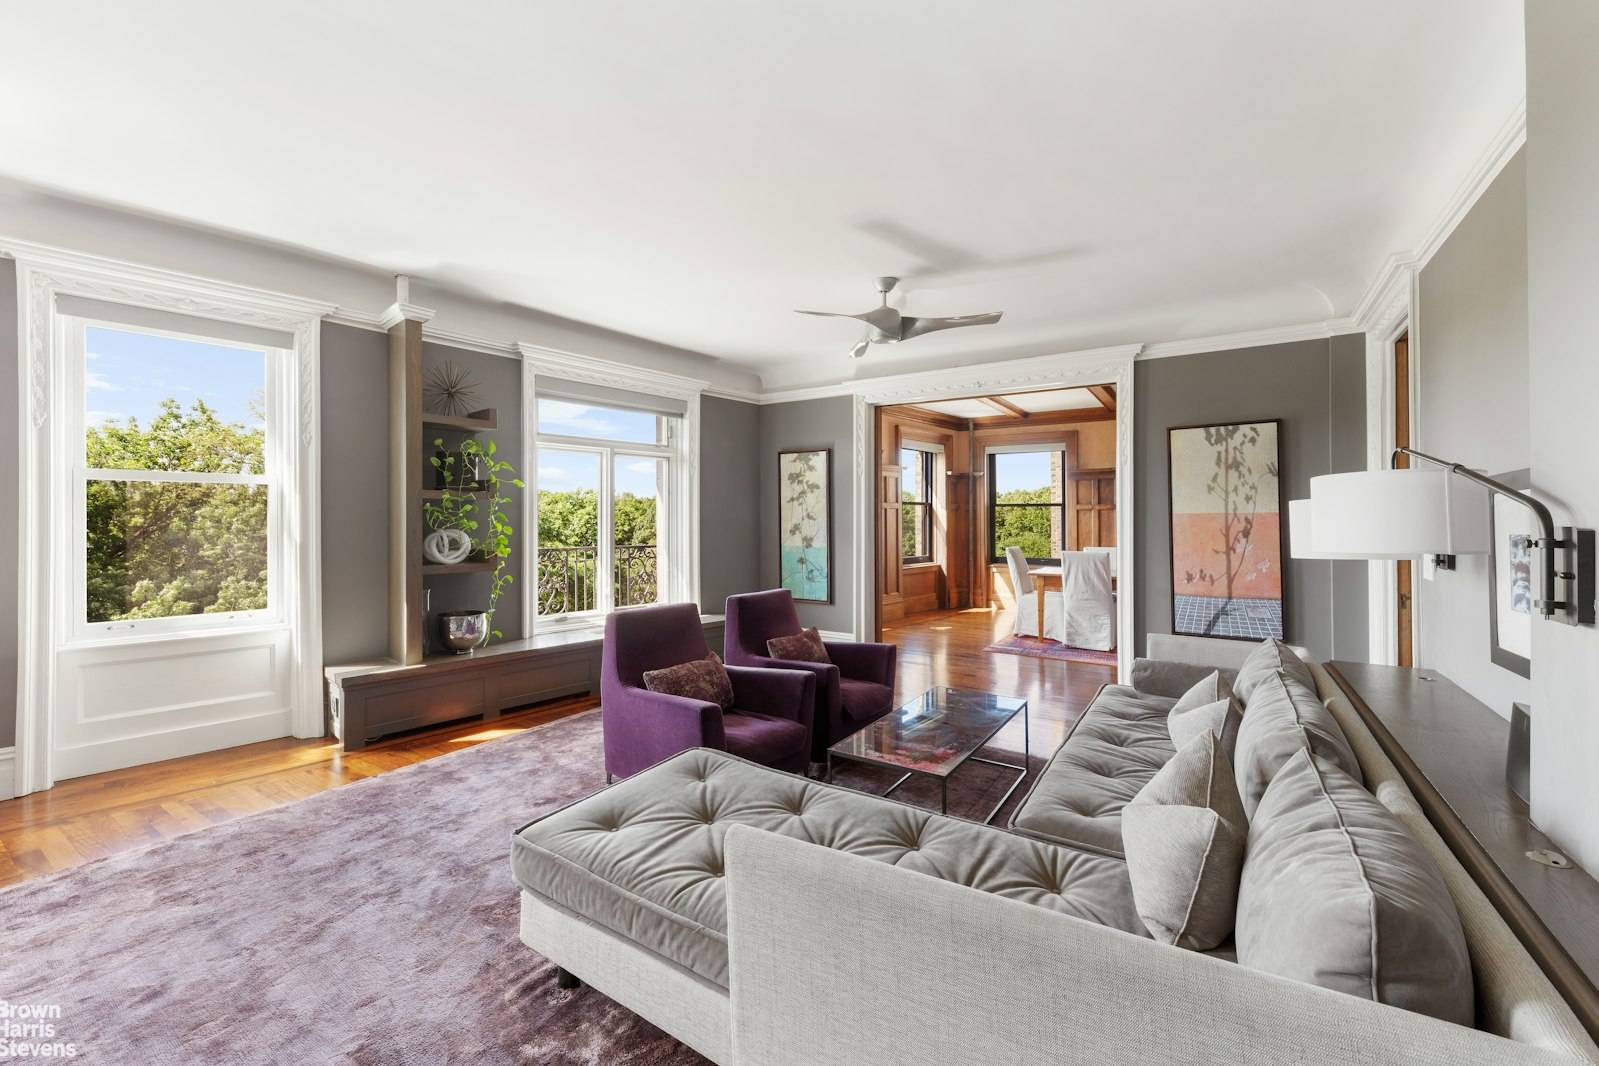 Sprawling renovated 8 room home with breathtaking views of Riverside Park in an historic pre war, turn of the century, Beaux Arts masterpiece located on 79th Street and Riverside Drive.